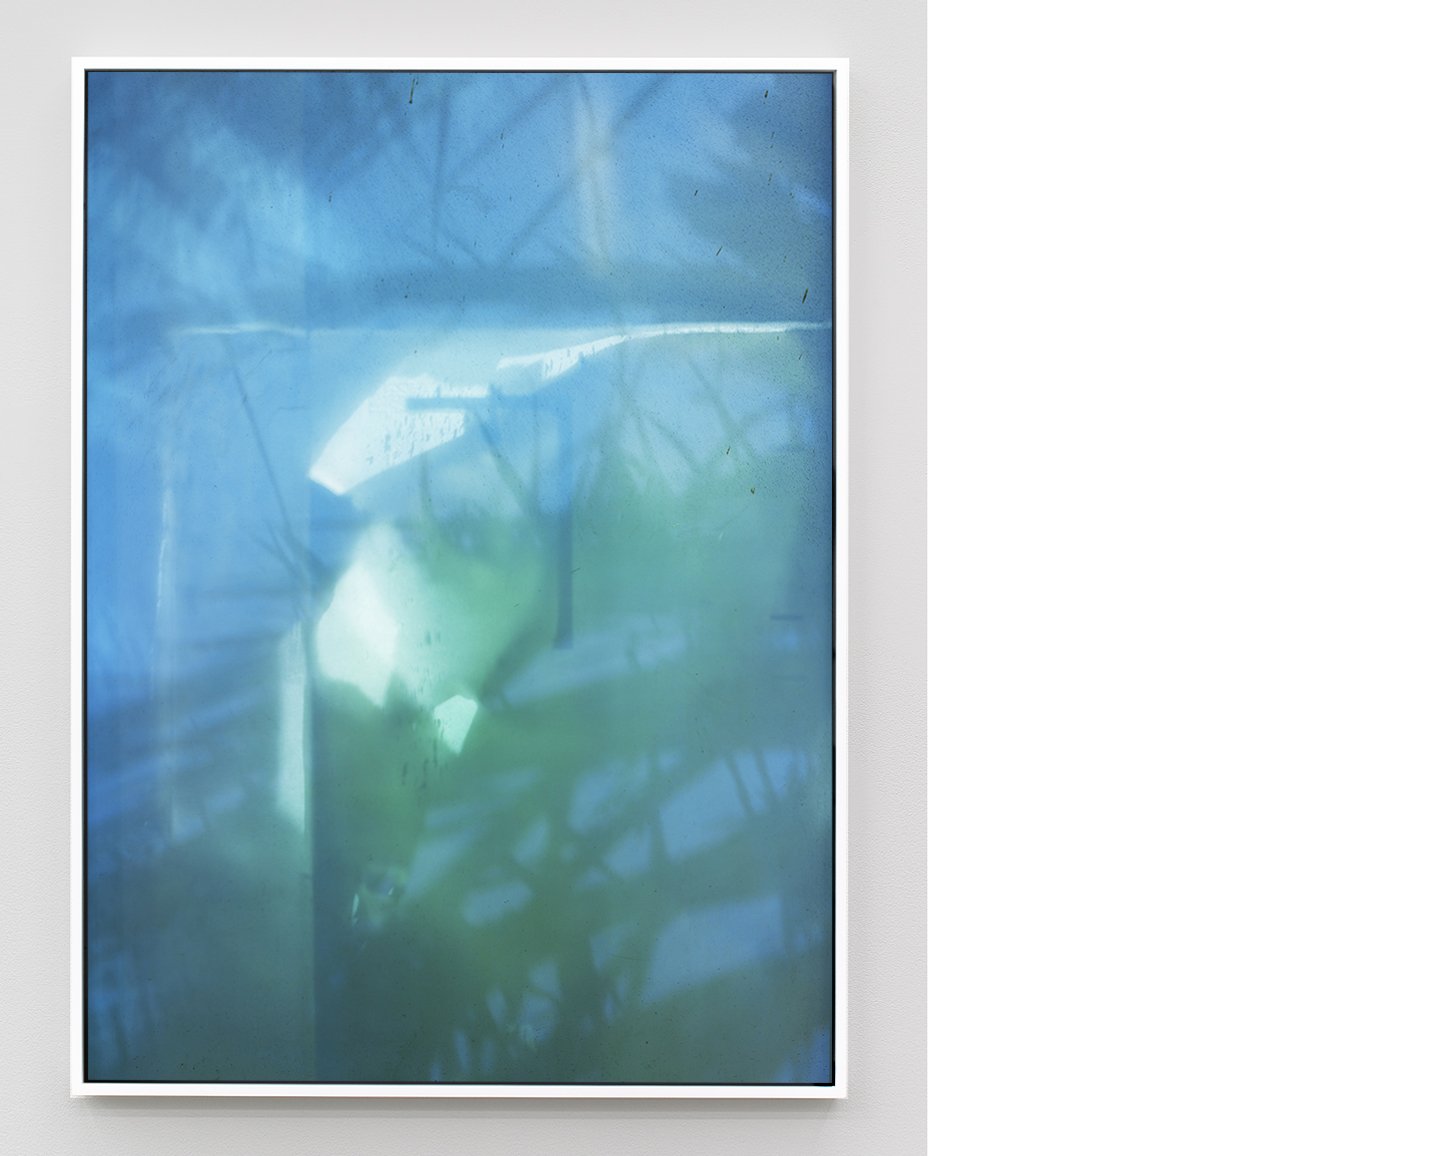   Untitled , 2014 Pigmented Inkjet Print Wood Frame 42” x 57” Edition of 5 plus 2 Artist Proofs 